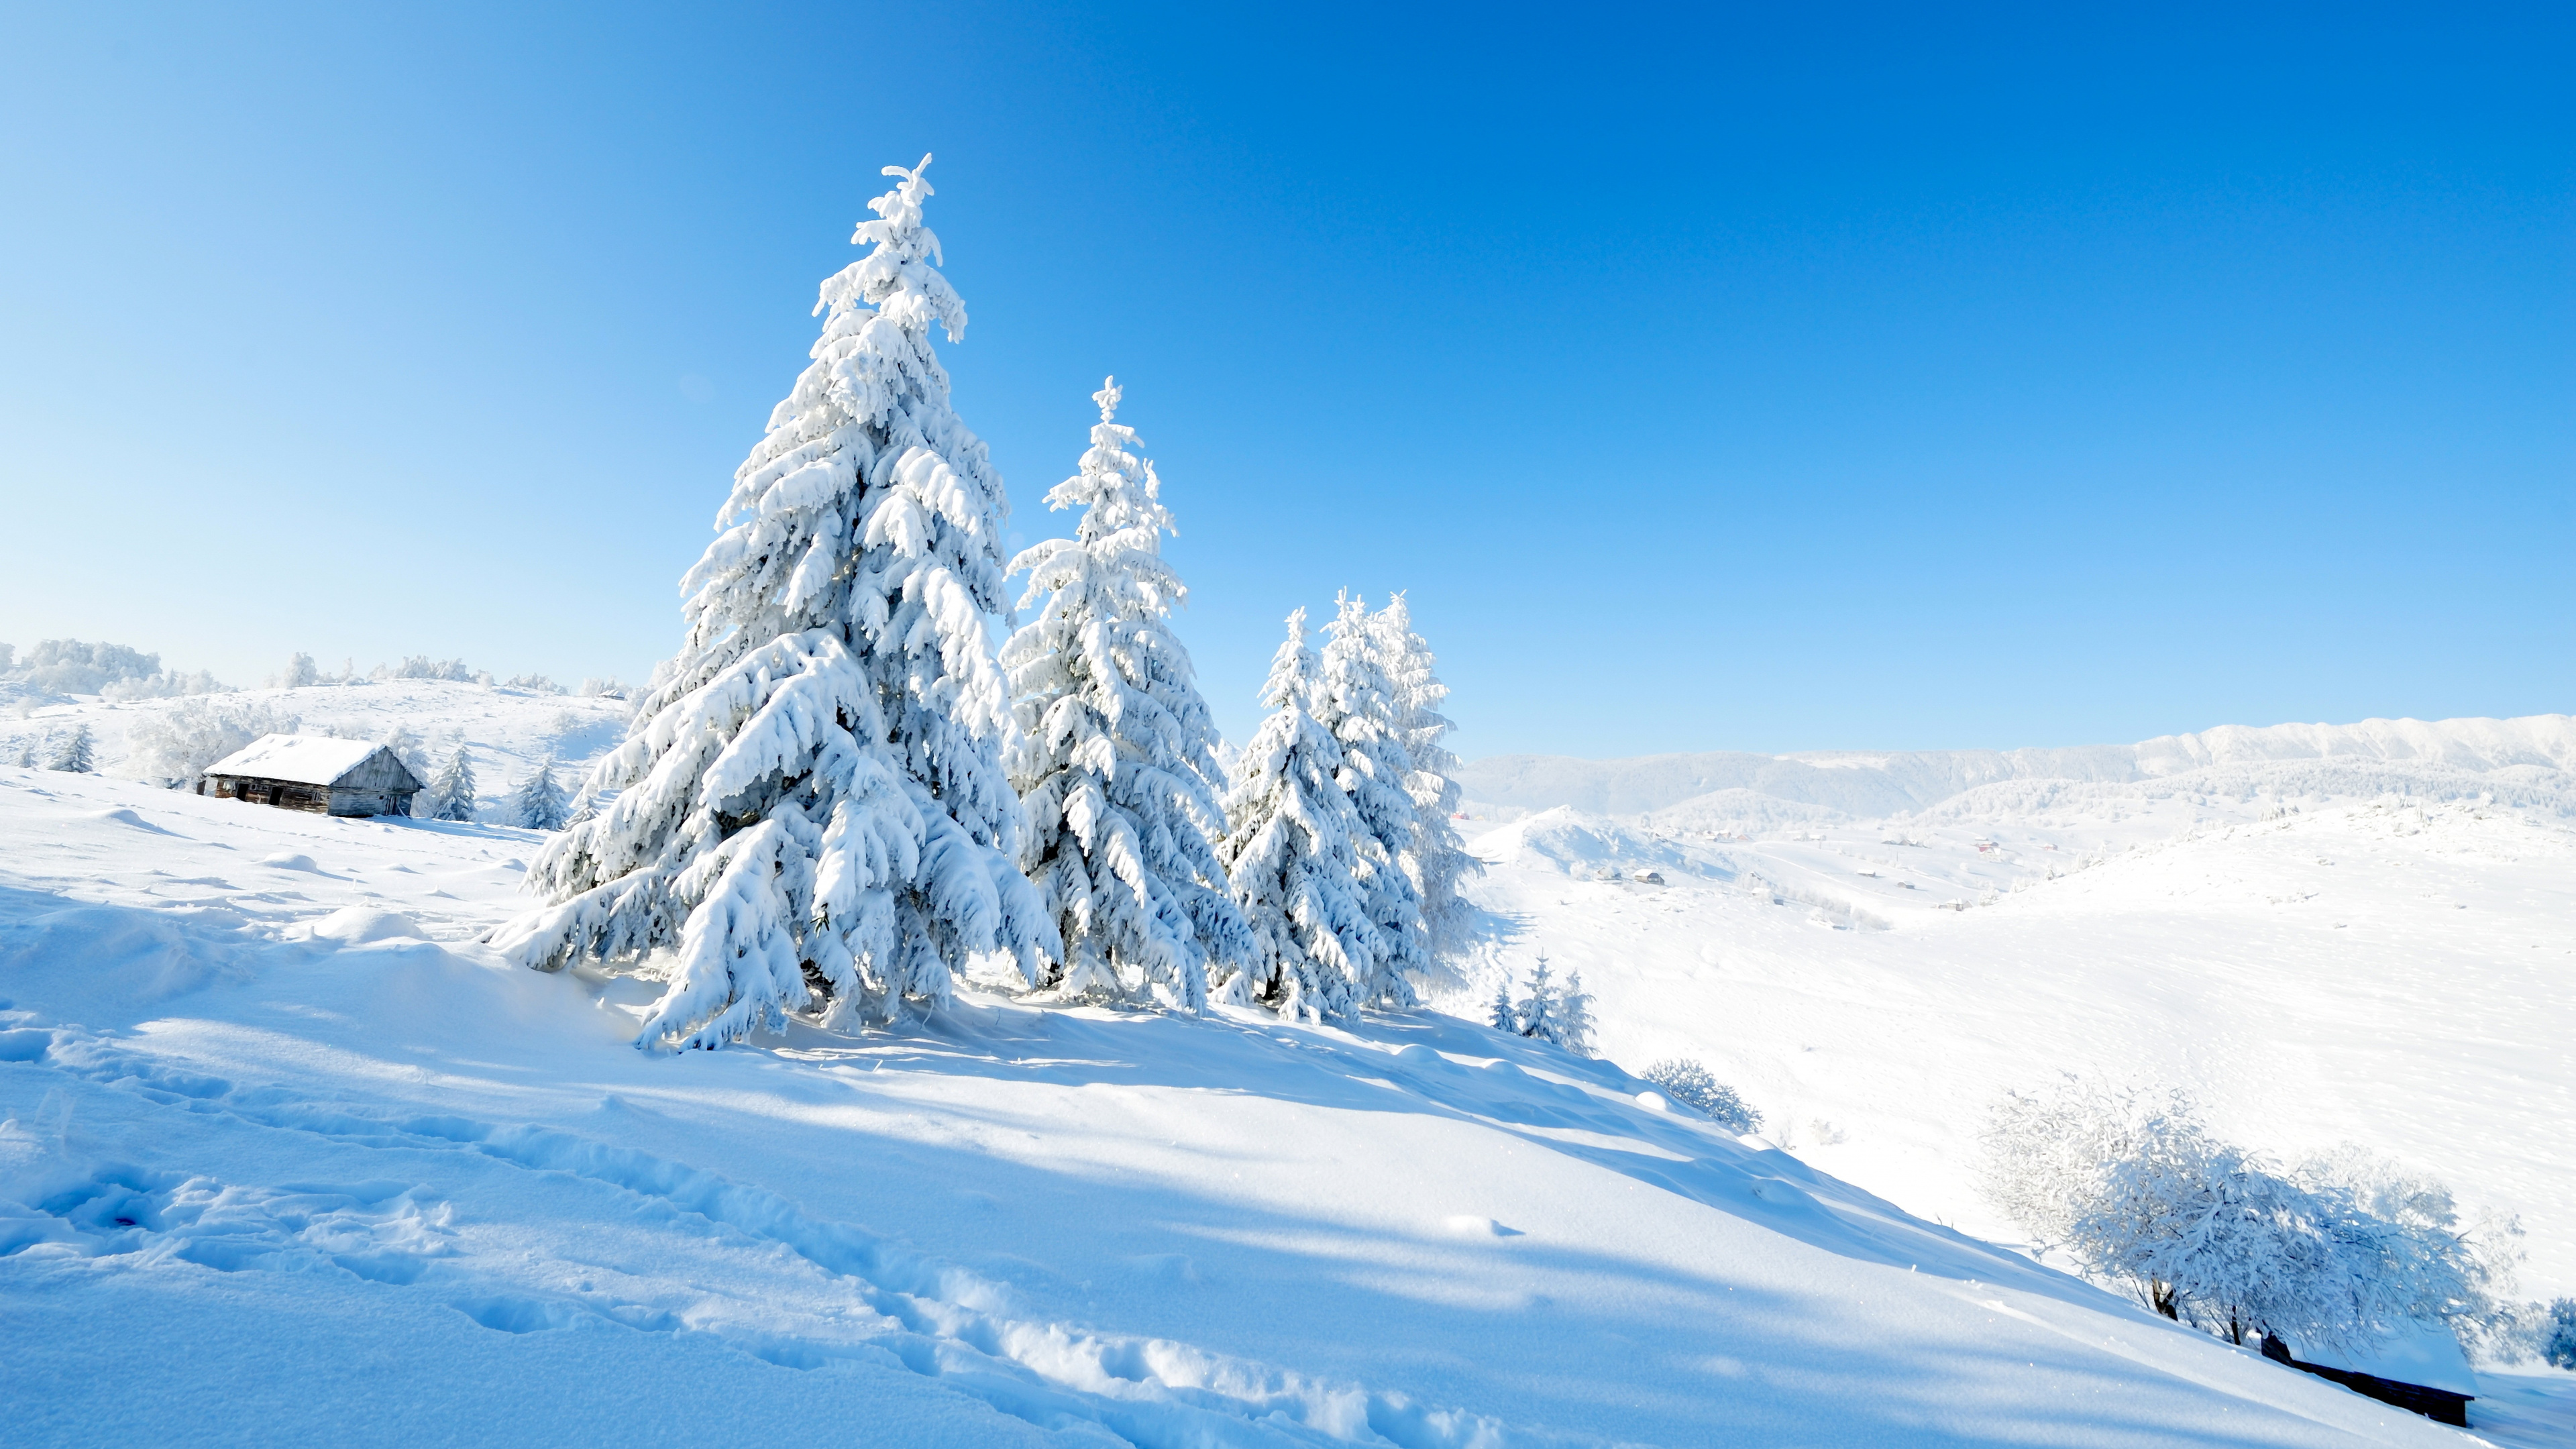 Snow Covered Pine Trees on Snow Covered Ground Under Blue Sky During Daytime. Wallpaper in 3840x2160 Resolution